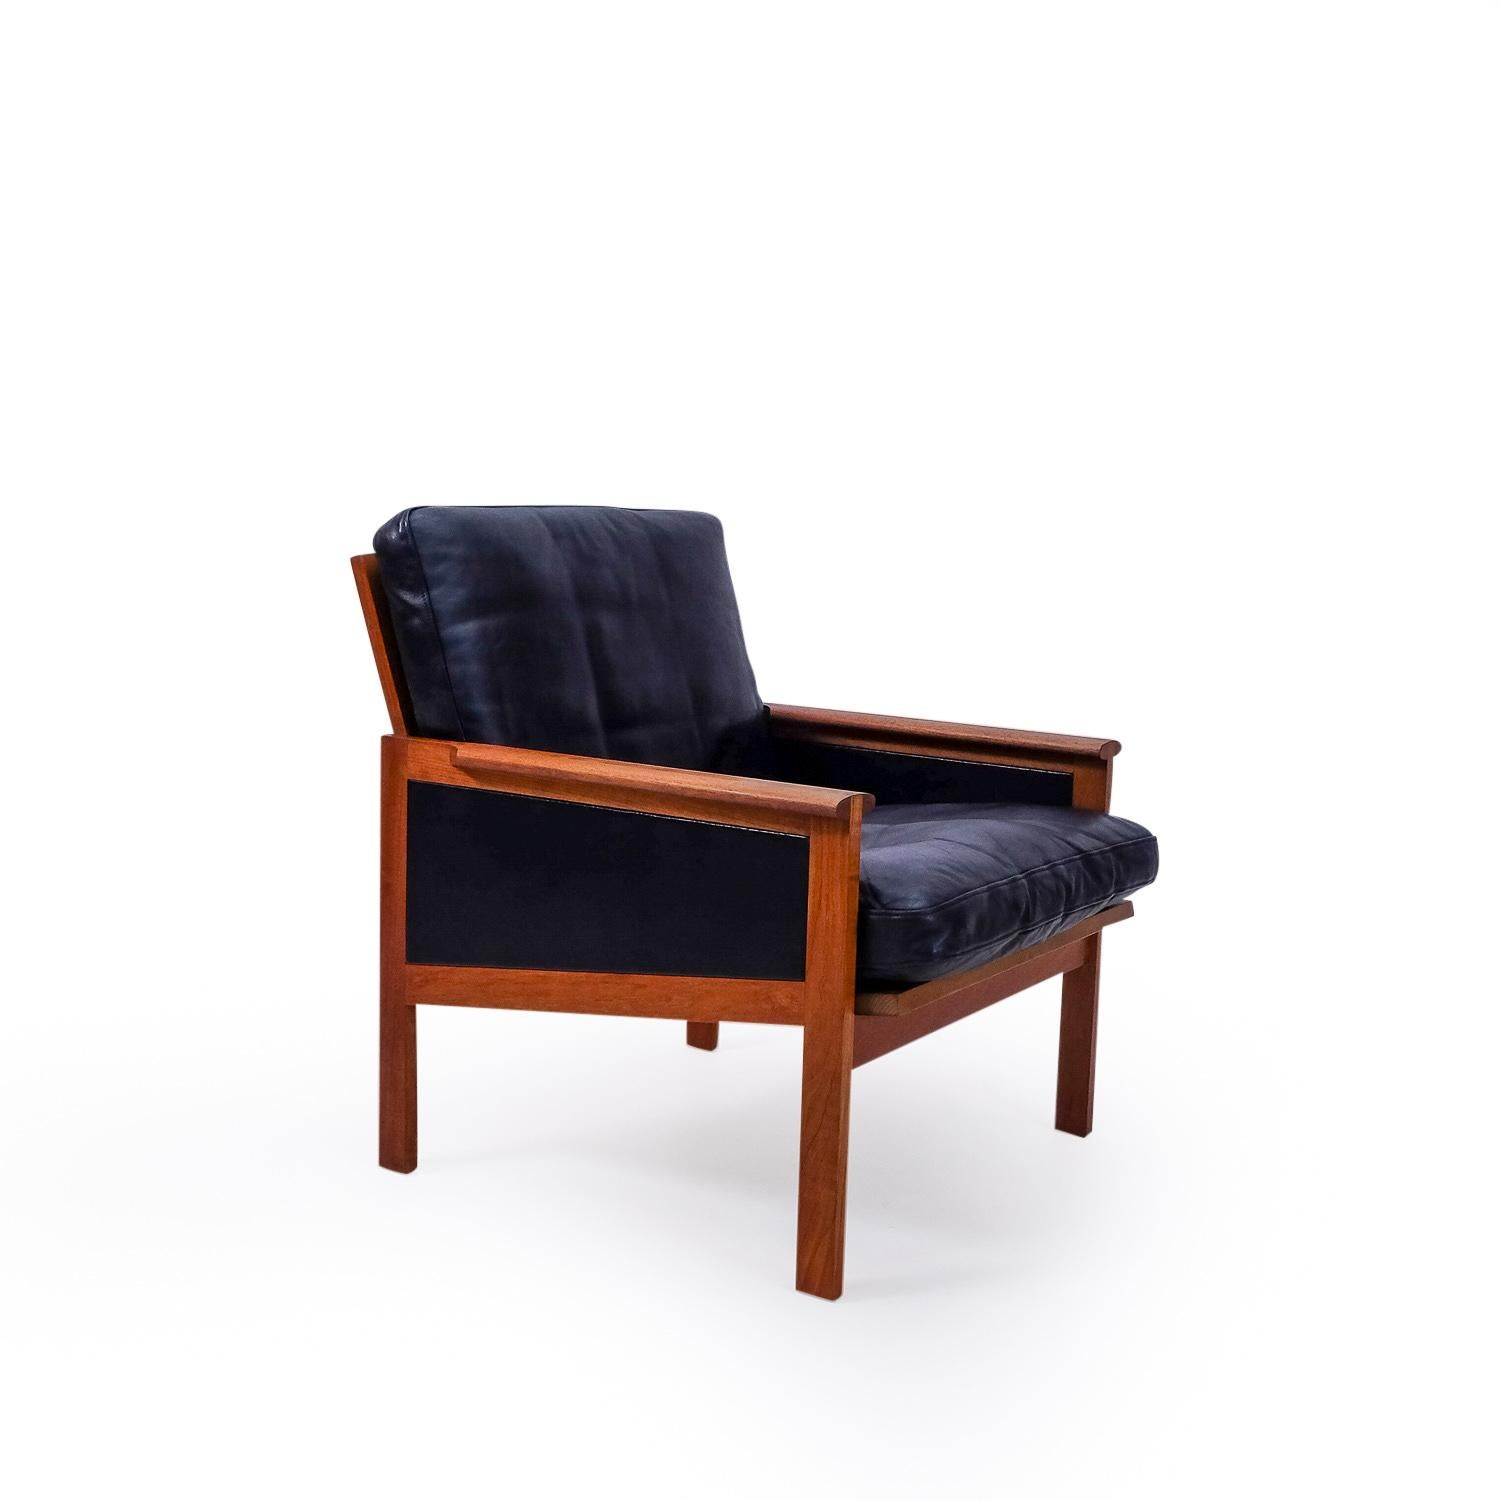 Vintage armchair by Illum Wikkelsø, 1958 Denmark

A very comfortable armchair from the Capella Series (1958) produced by Niels Eilersen and designed by Illum Wikkelsø in Denmark.

This lounger features the original black leather upholstery,